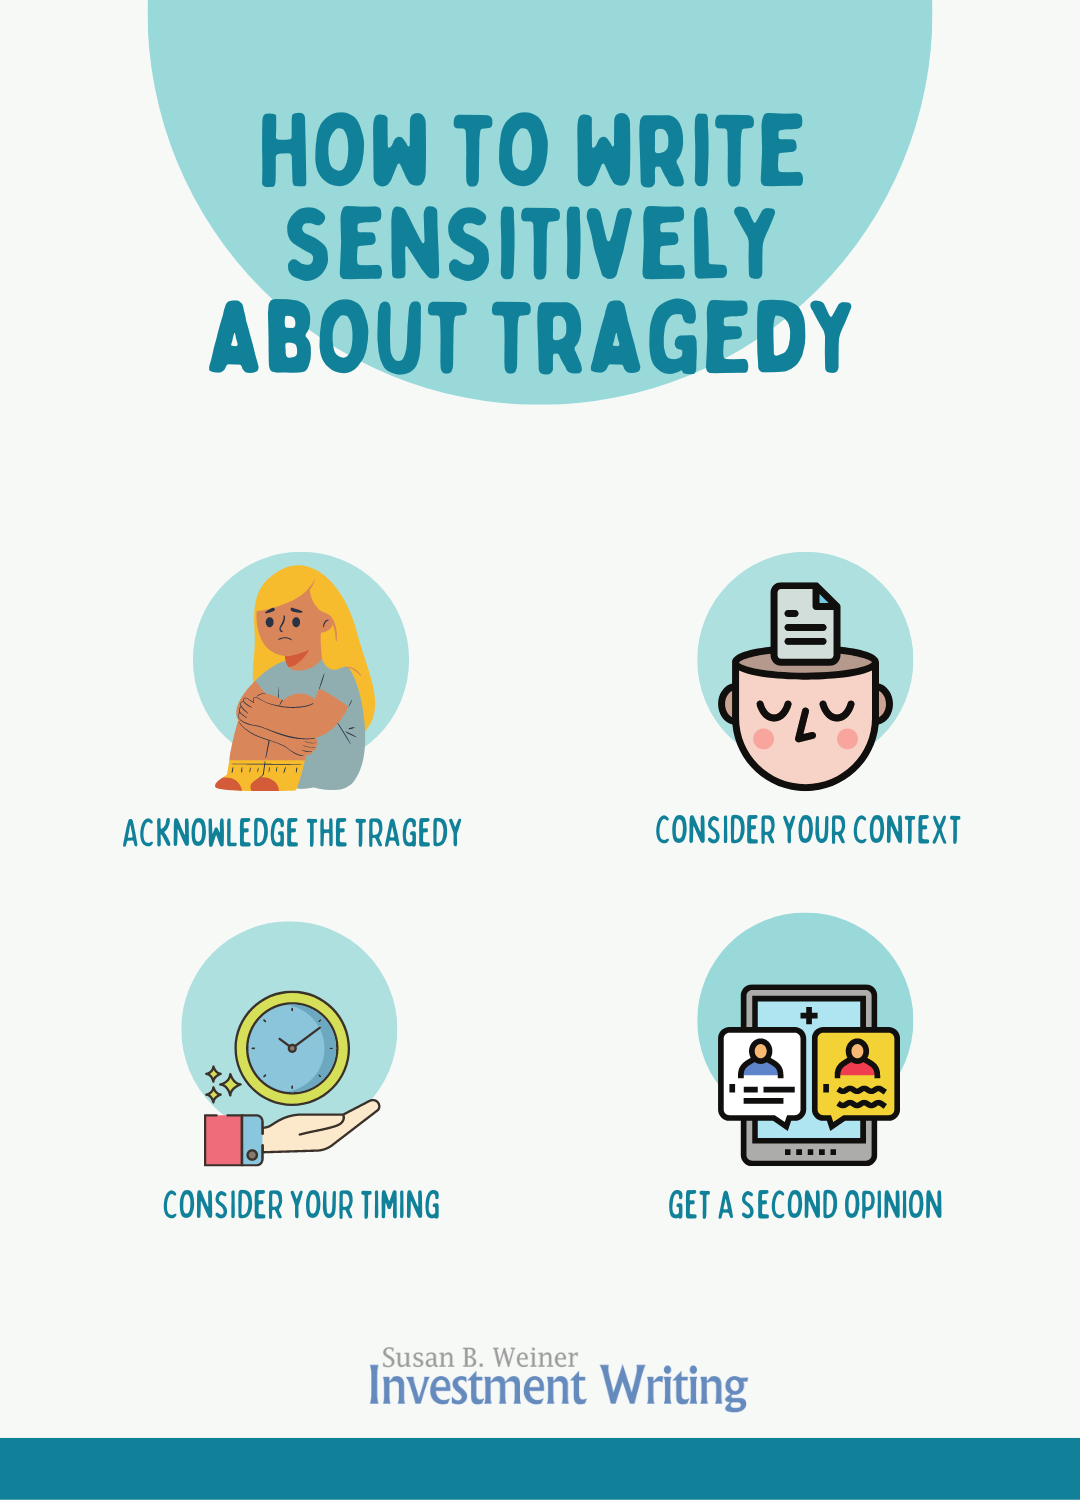 writing sensitively about tragedy infographic